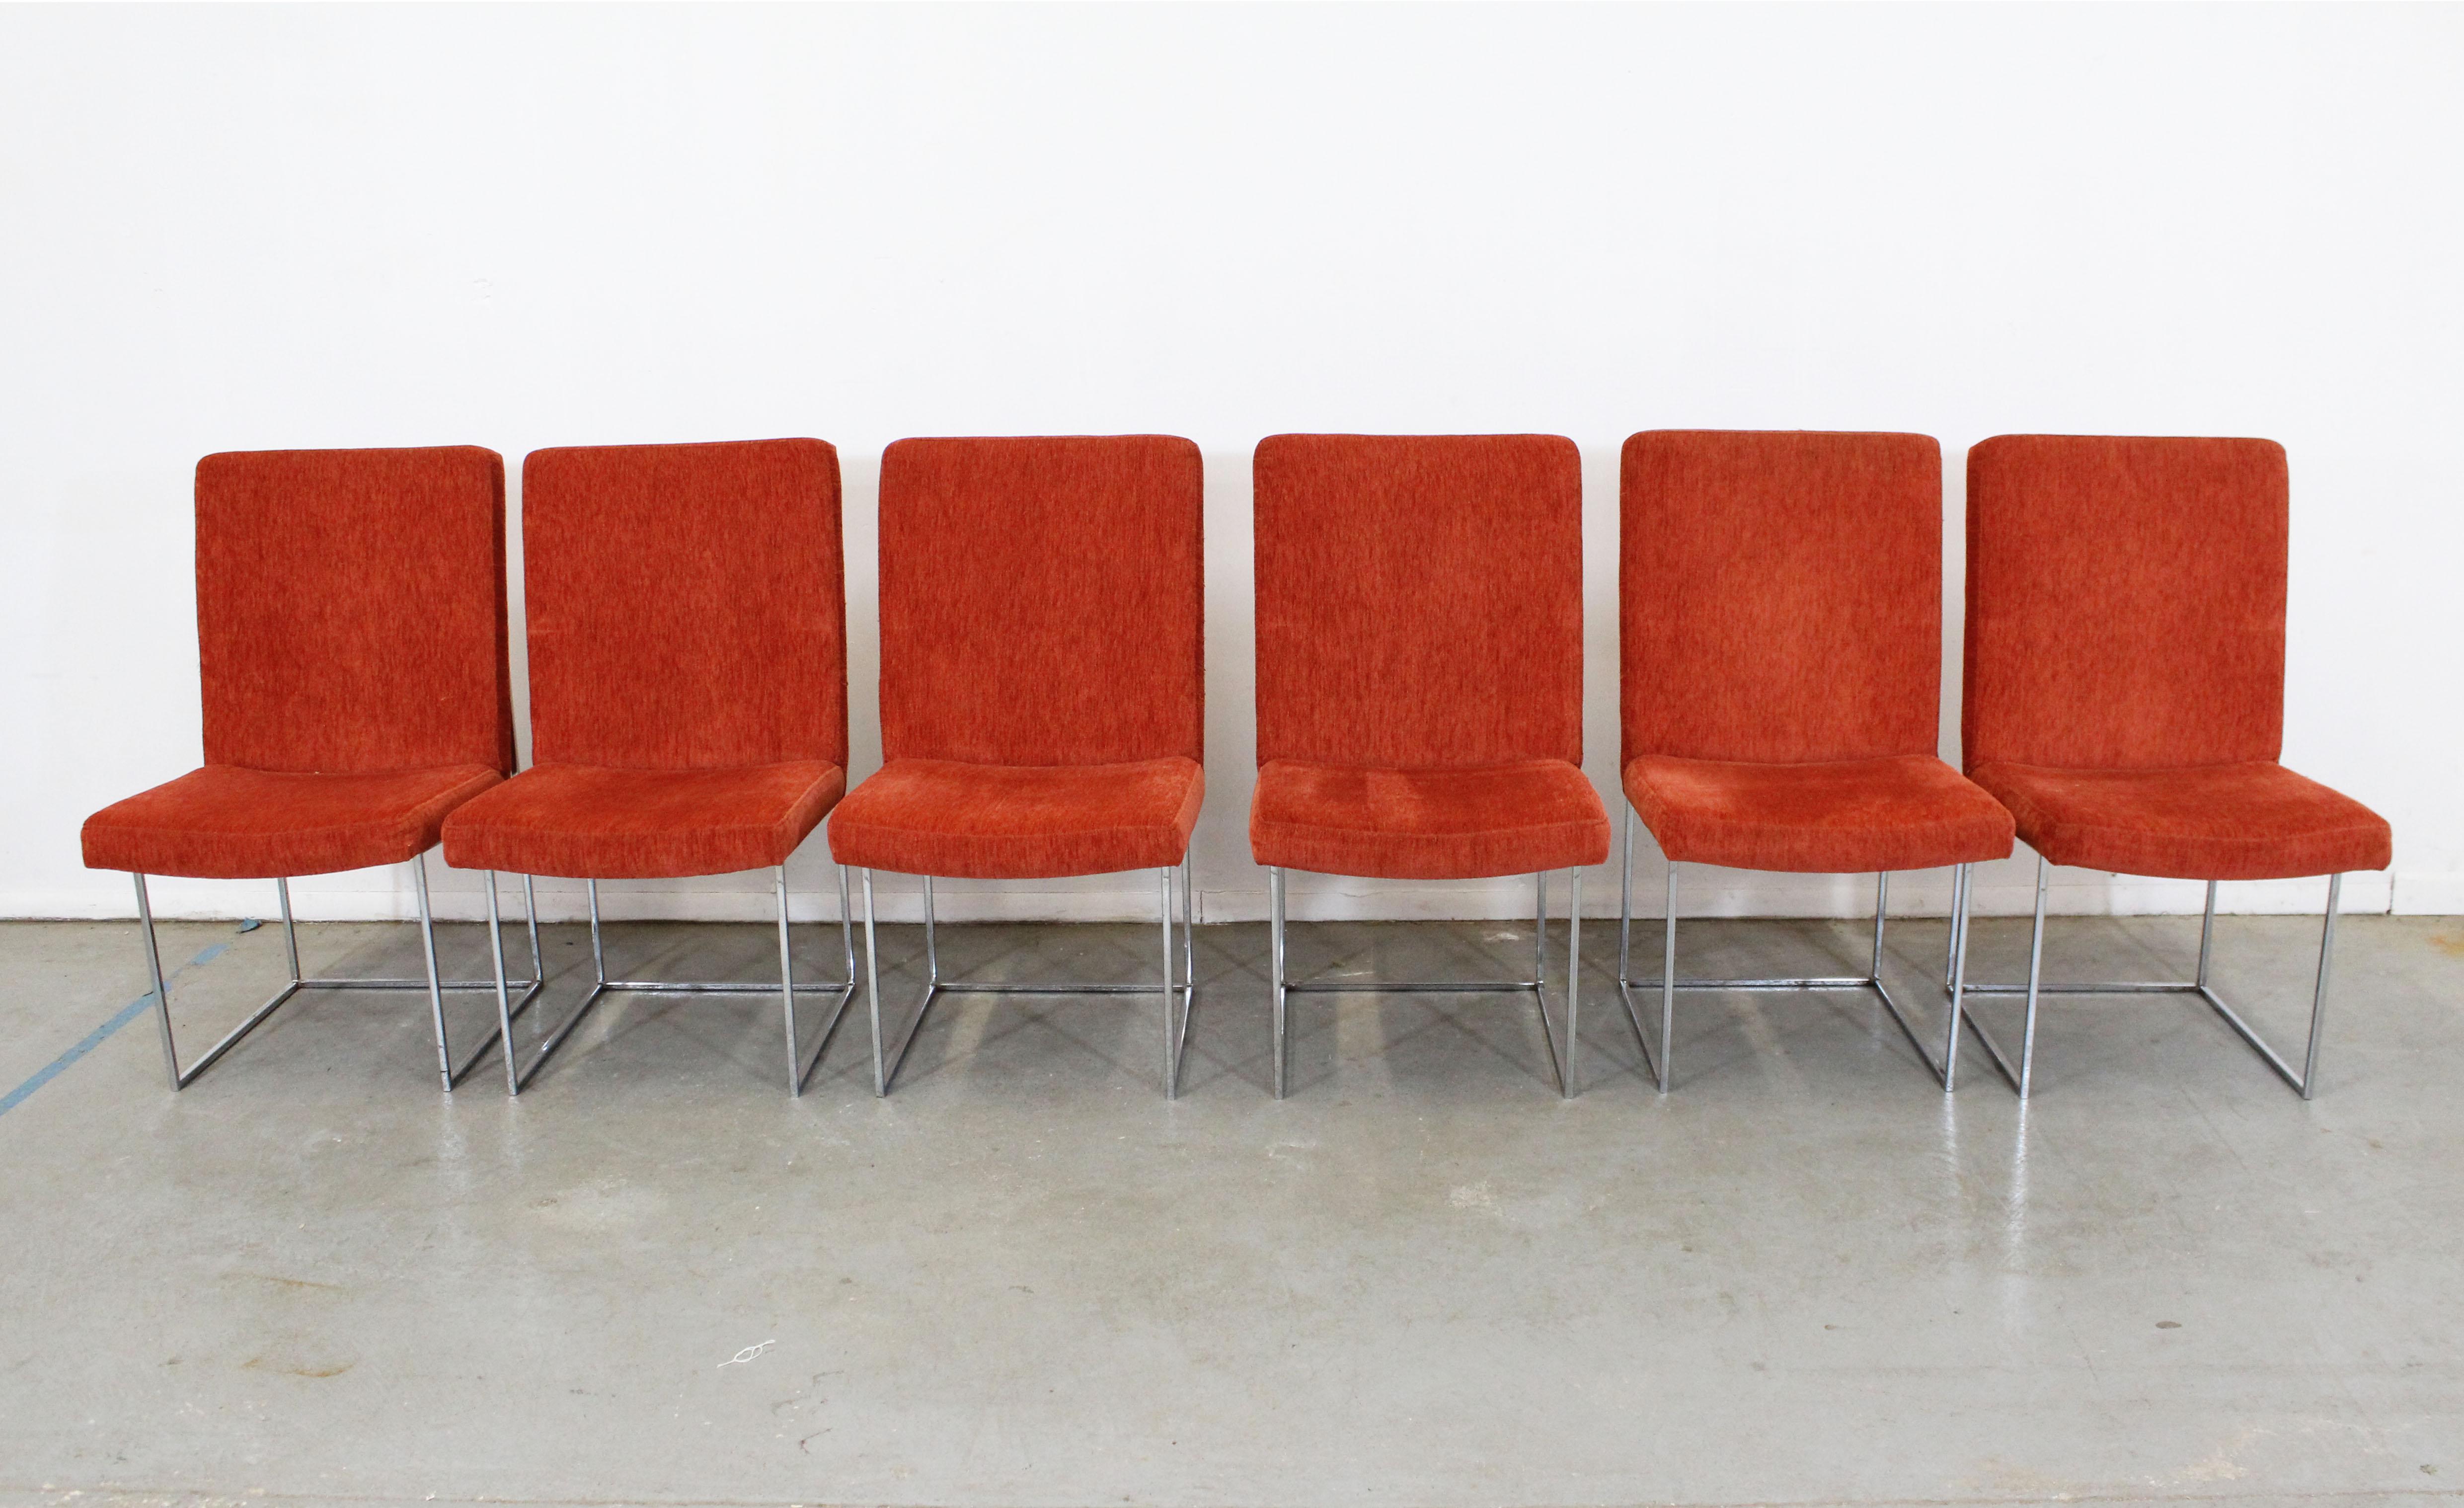 American Set of 6 Mid-Century Modern Milo Baughman for Thayer Coggin Chrome Dining Chairs